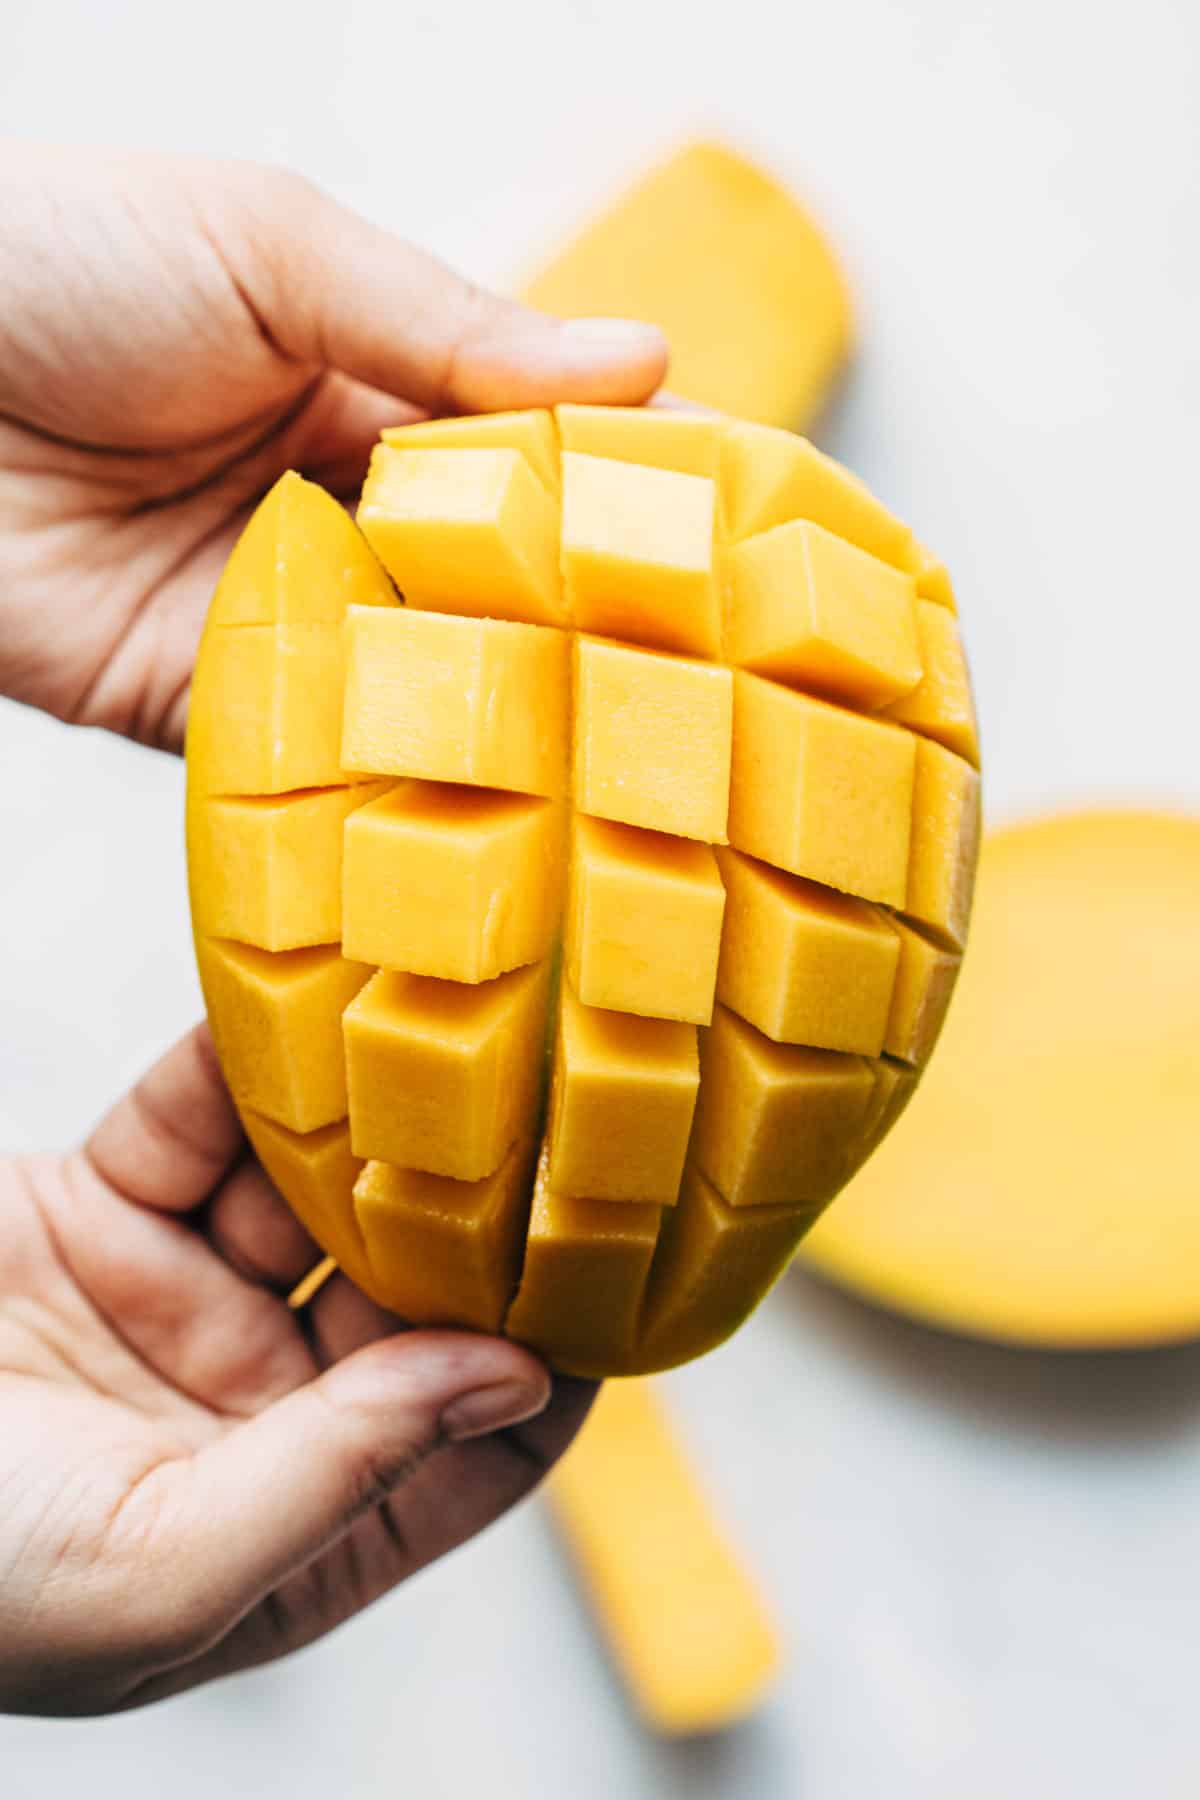 A peeled mango cut into dices by making horizontal and vertical cuts.